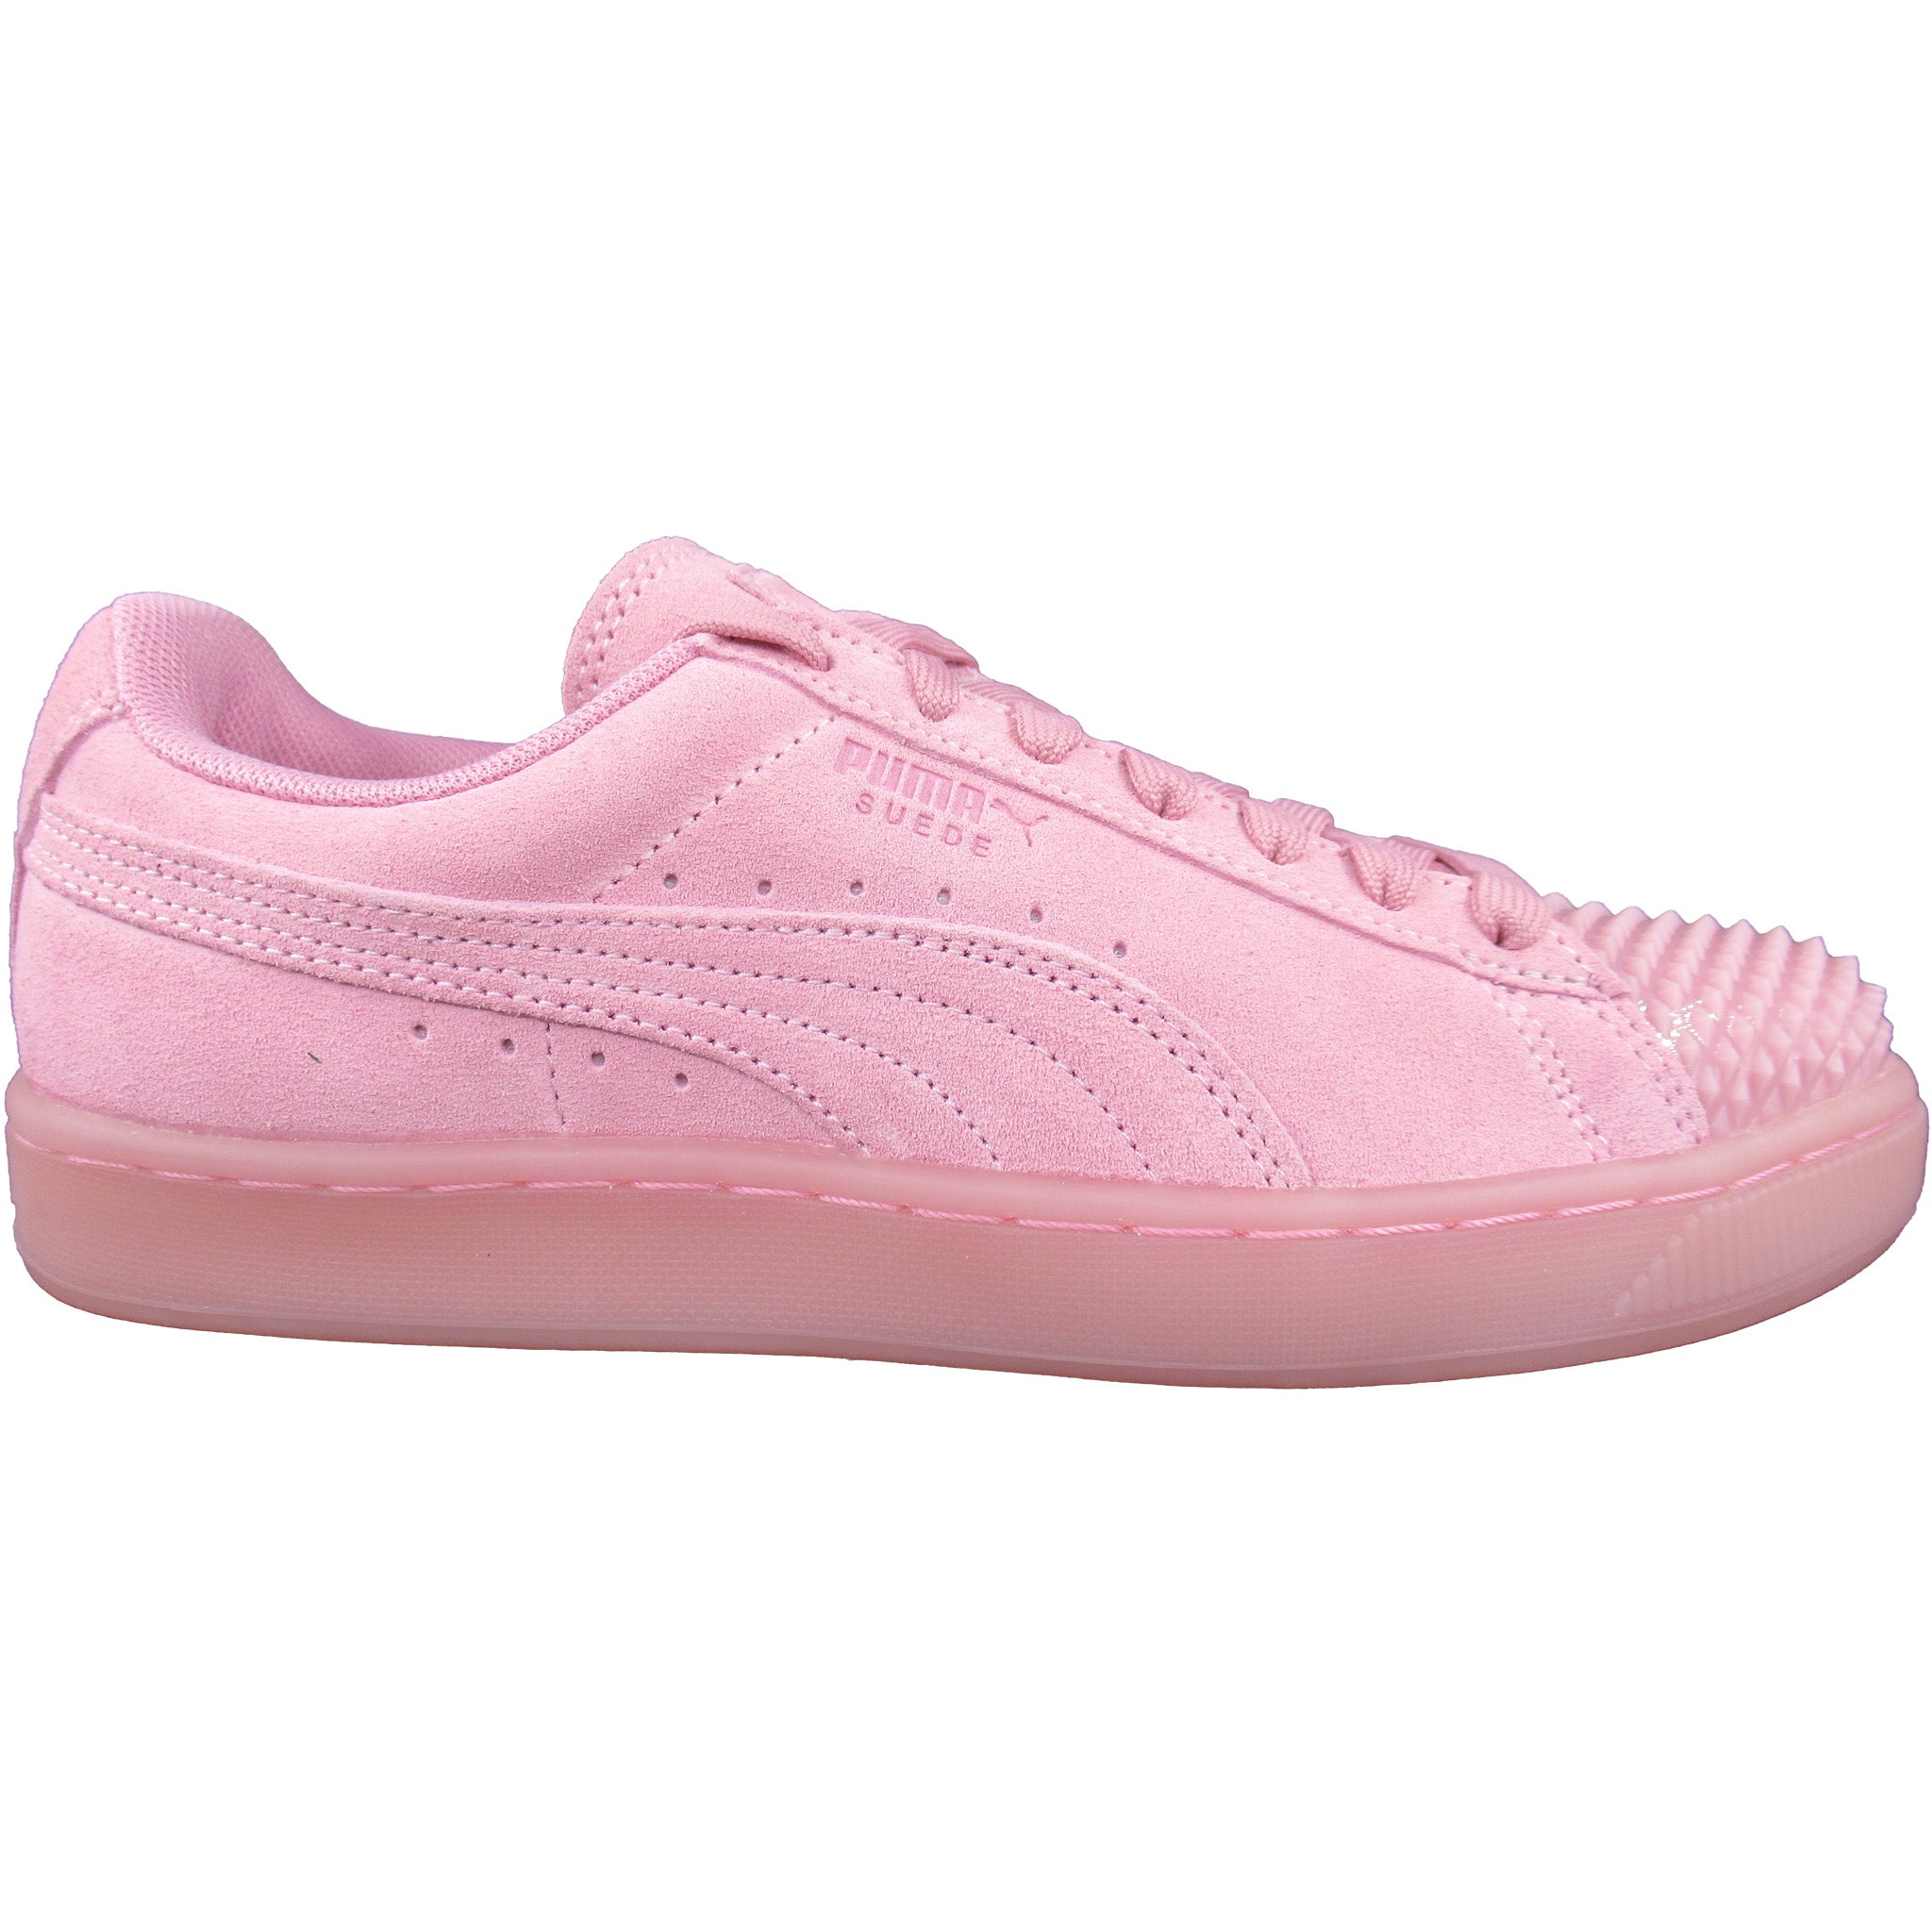 Puma Women's Suede Jelly Spiked Toe Cap Trainers Lace Up Shoes | eBay